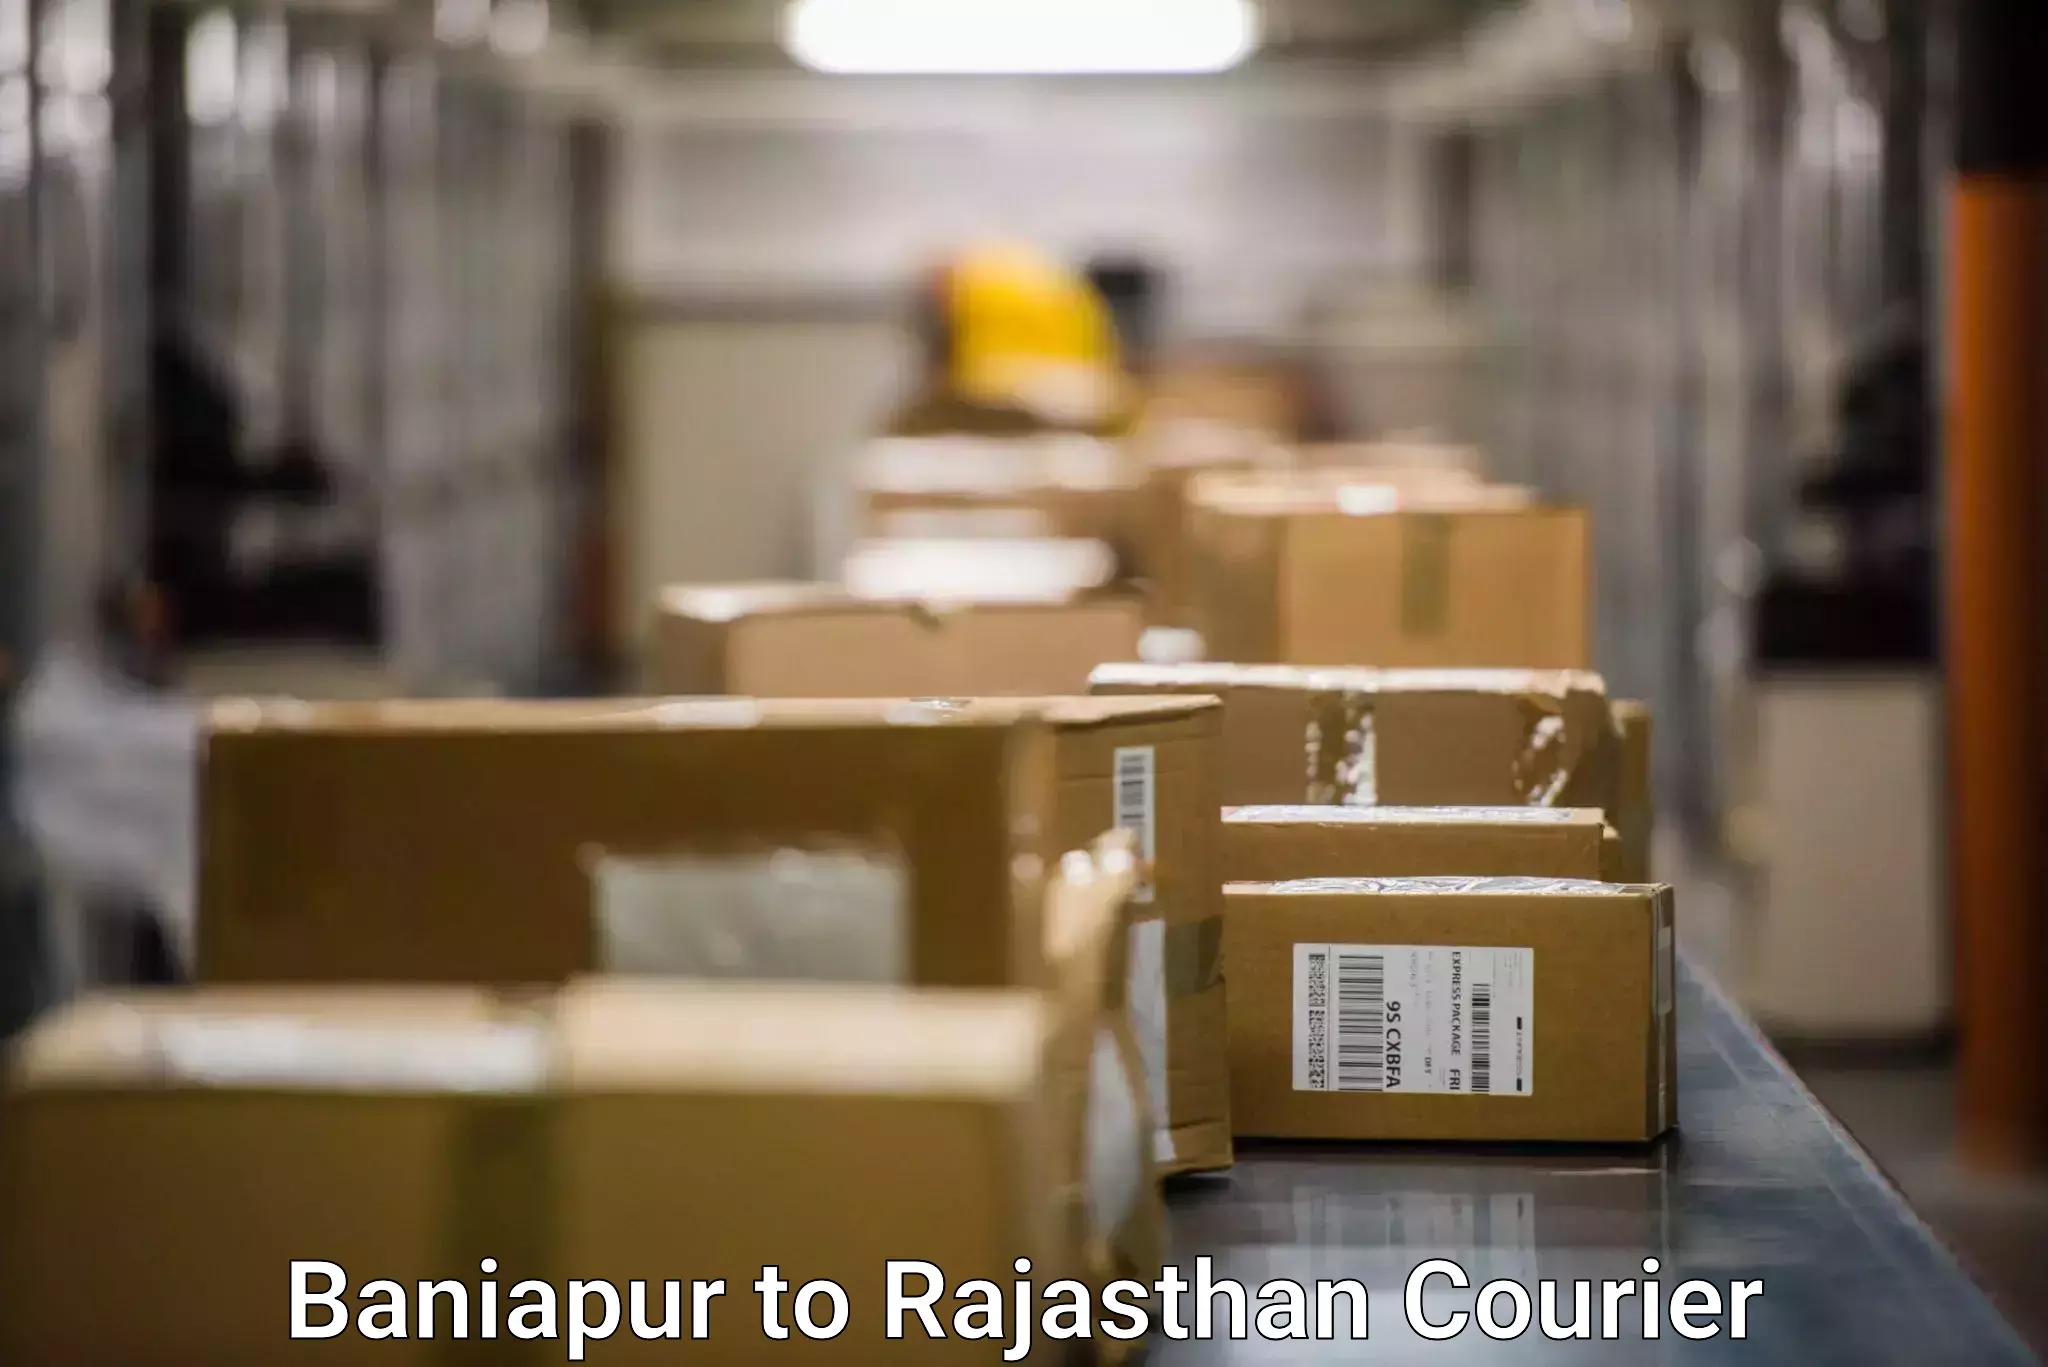 Express delivery capabilities Baniapur to Bayana